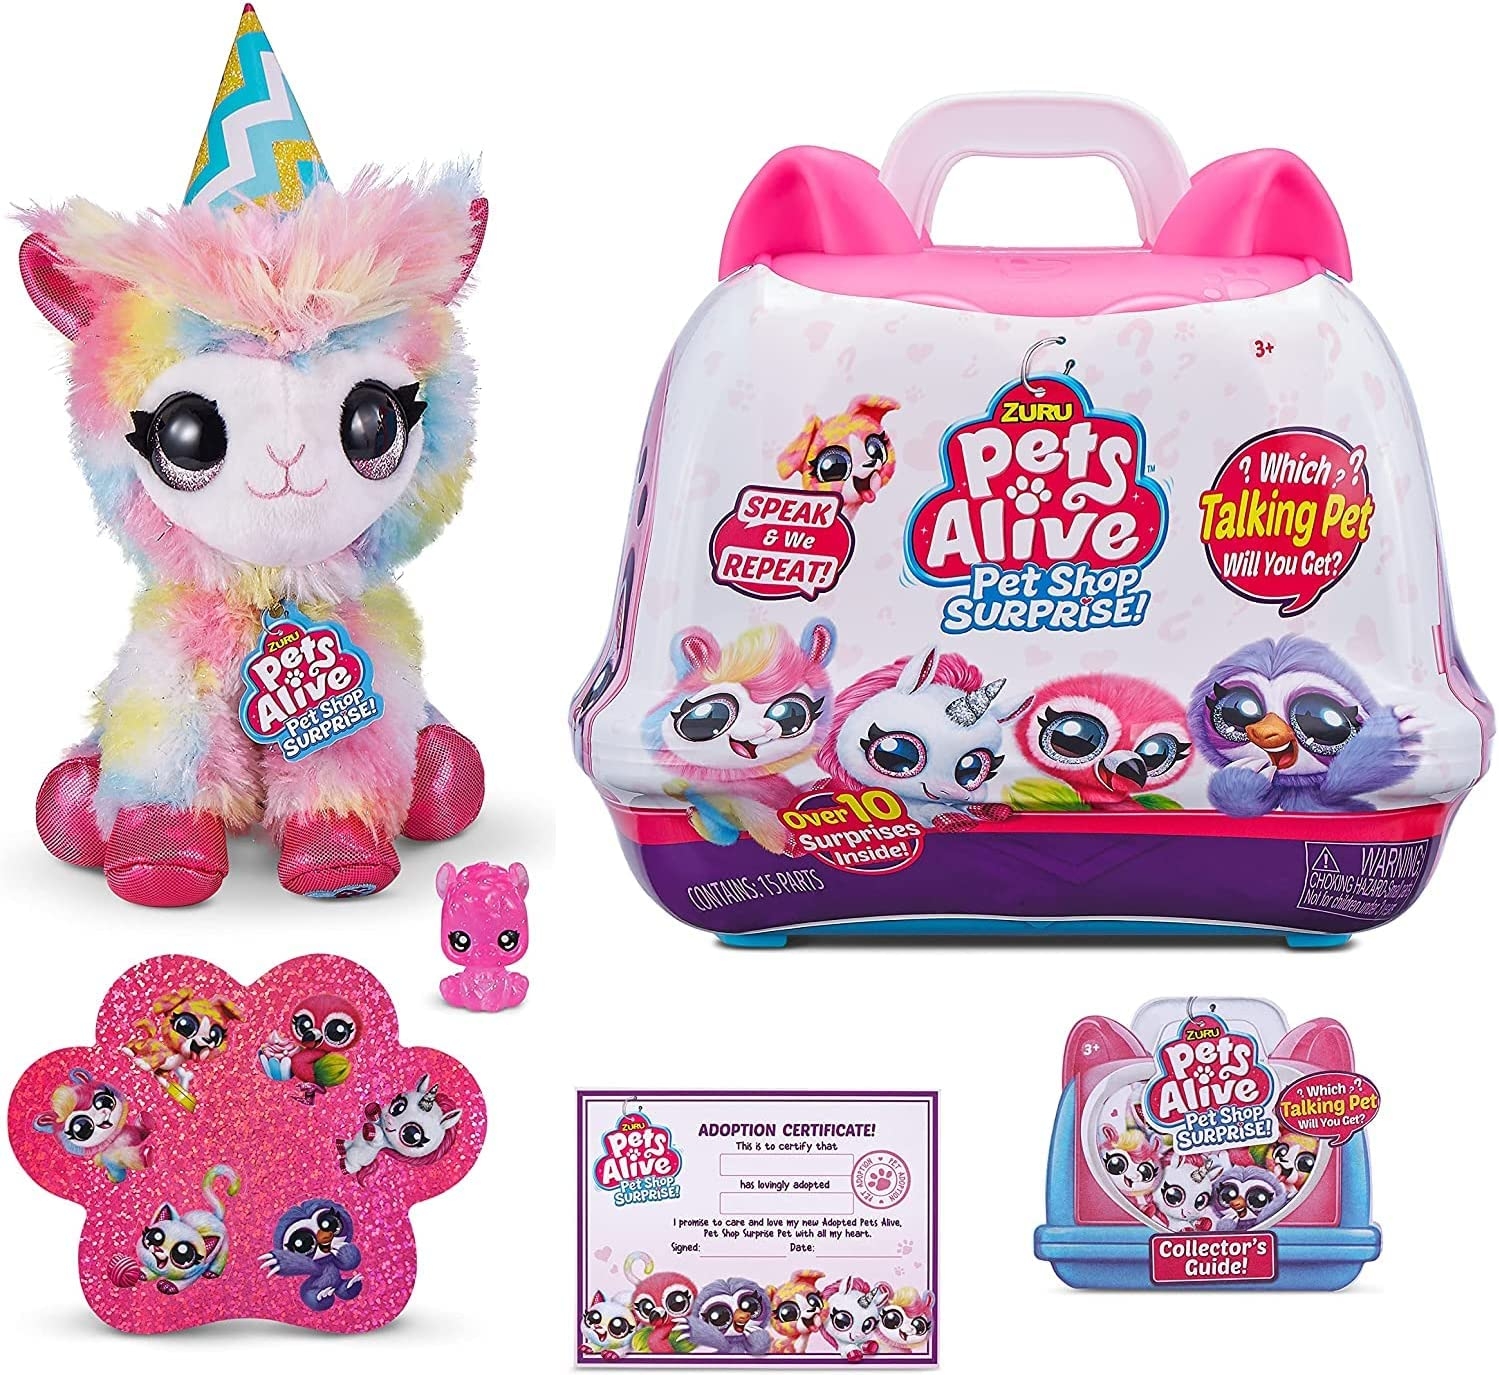 Pets Alive Pet Shop Surprise Series 2 (Unicorn) by ZURU Soft Interactive Toy Pets with Electronic ‘Speak and Repeat’ Plush